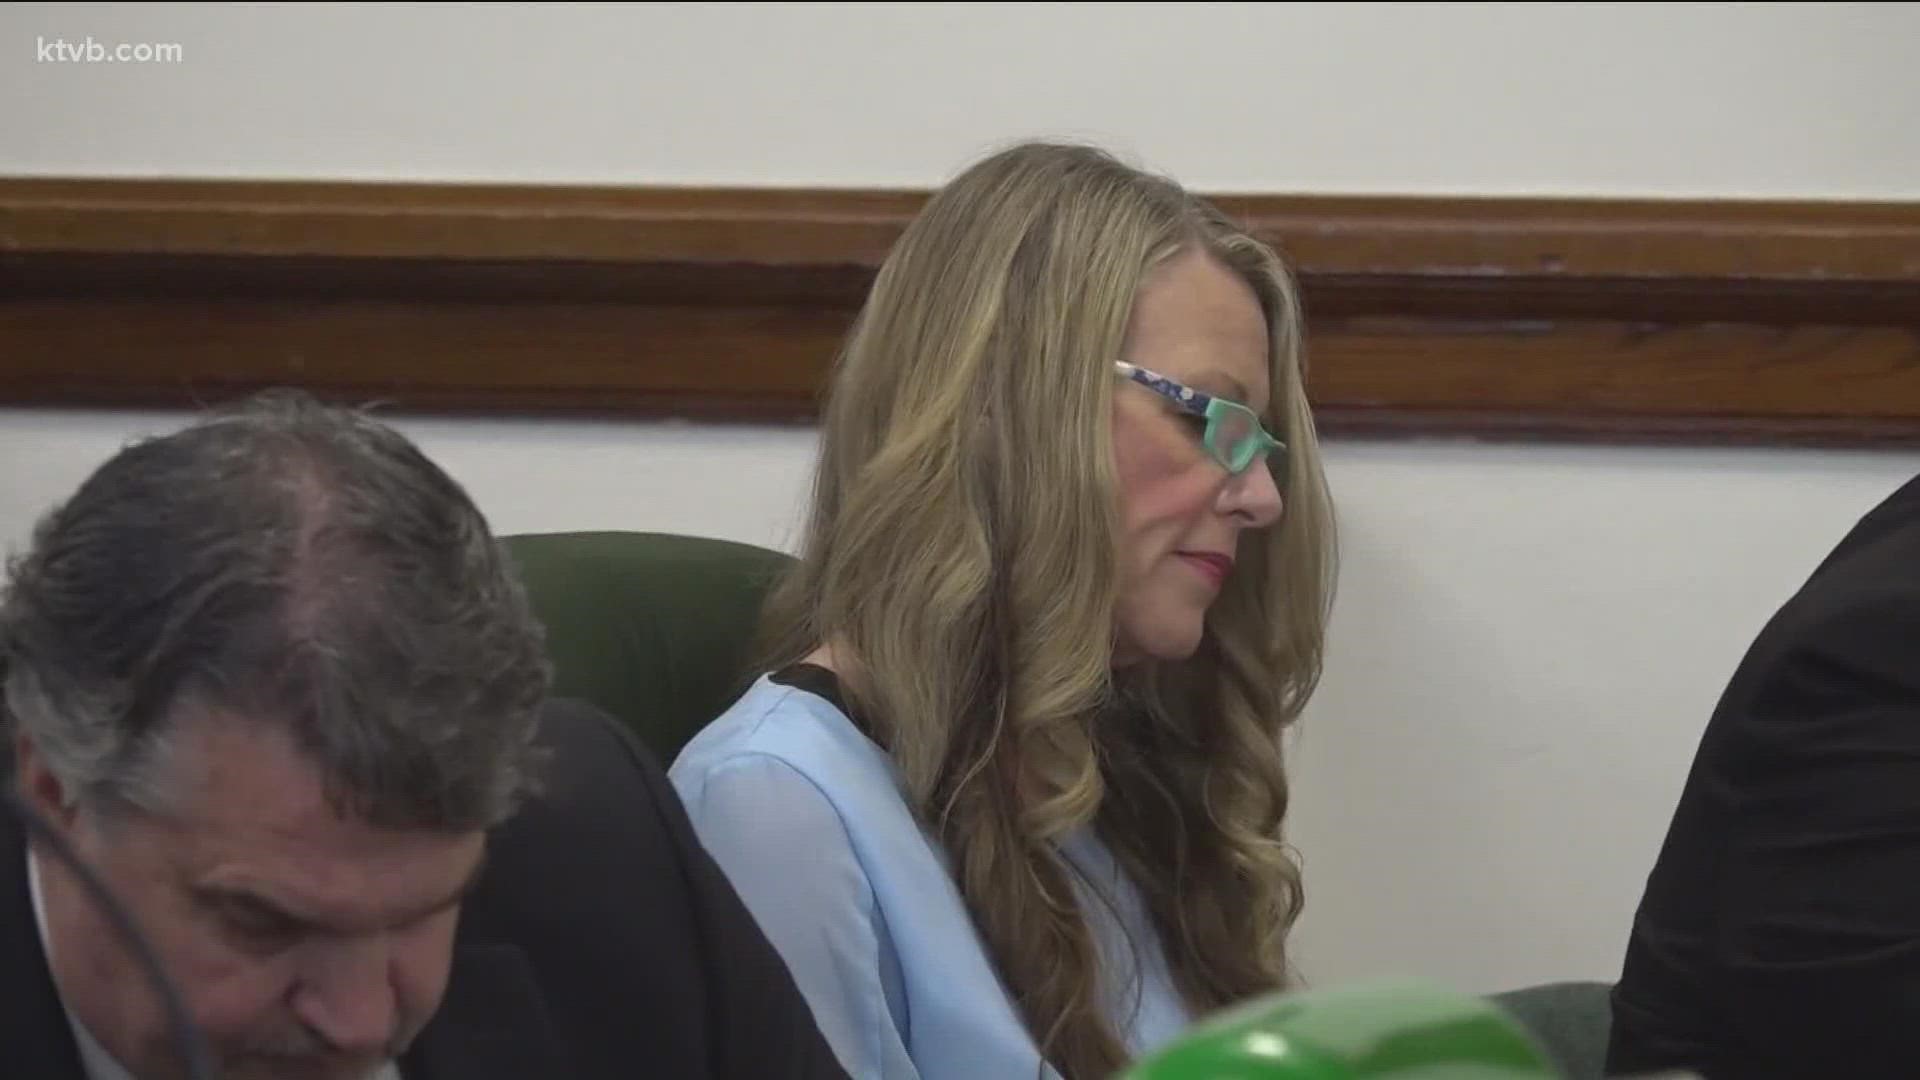 An eastern Idaho judge on Thursday granted a motion to set Lori Vallow's trial later than the date typically required under Idaho's speedy-trial law.